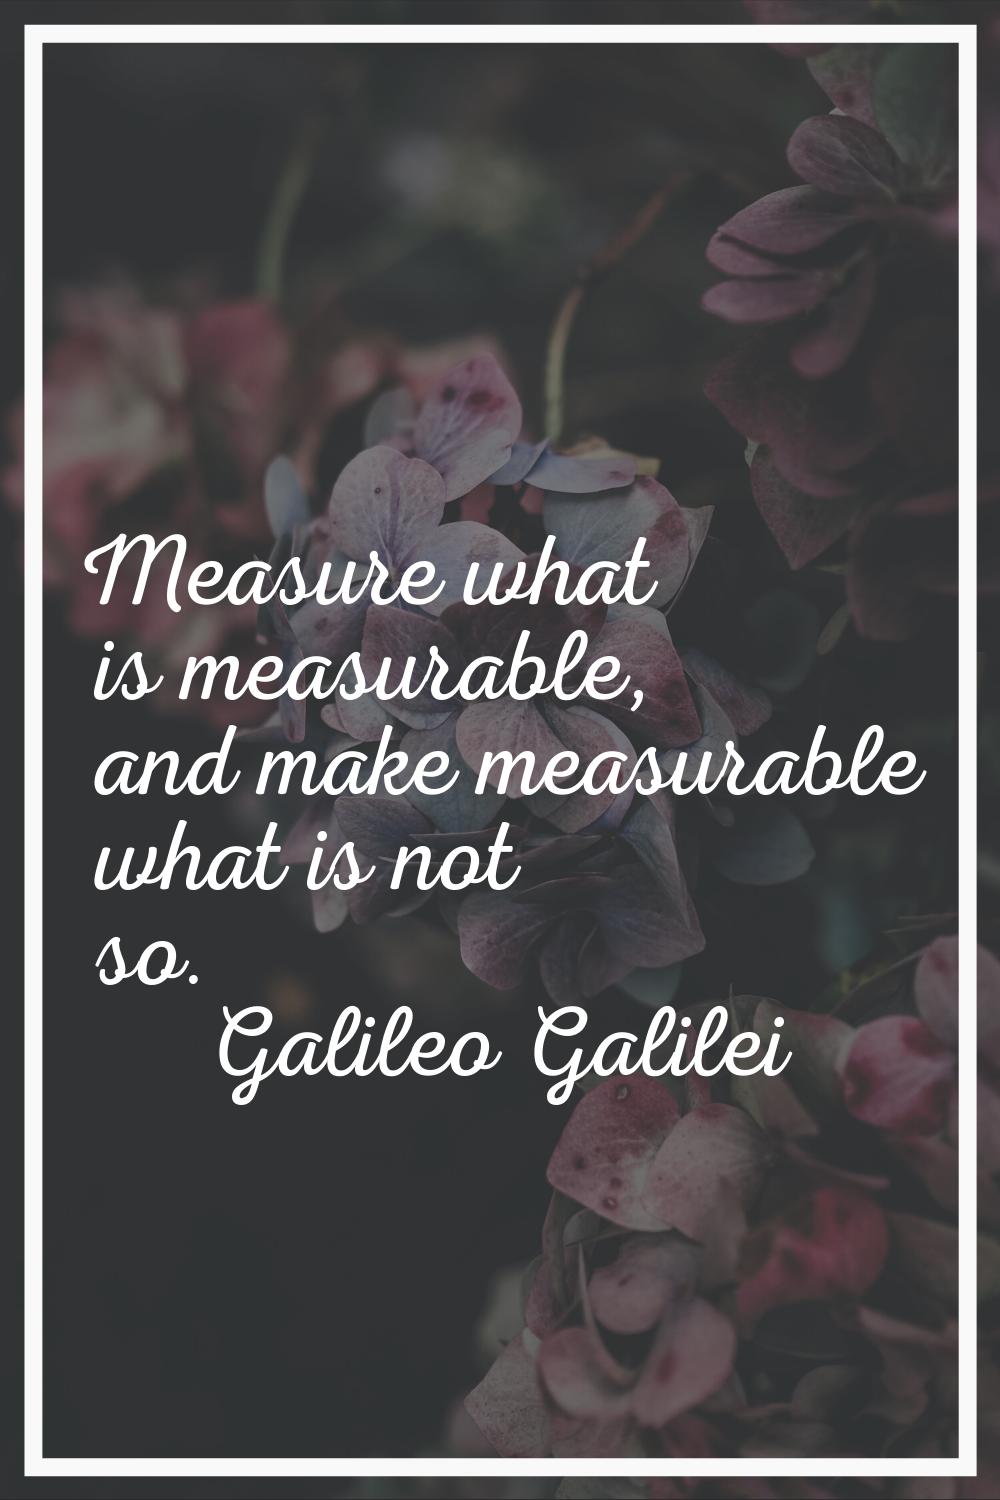 Measure what is measurable, and make measurable what is not so.